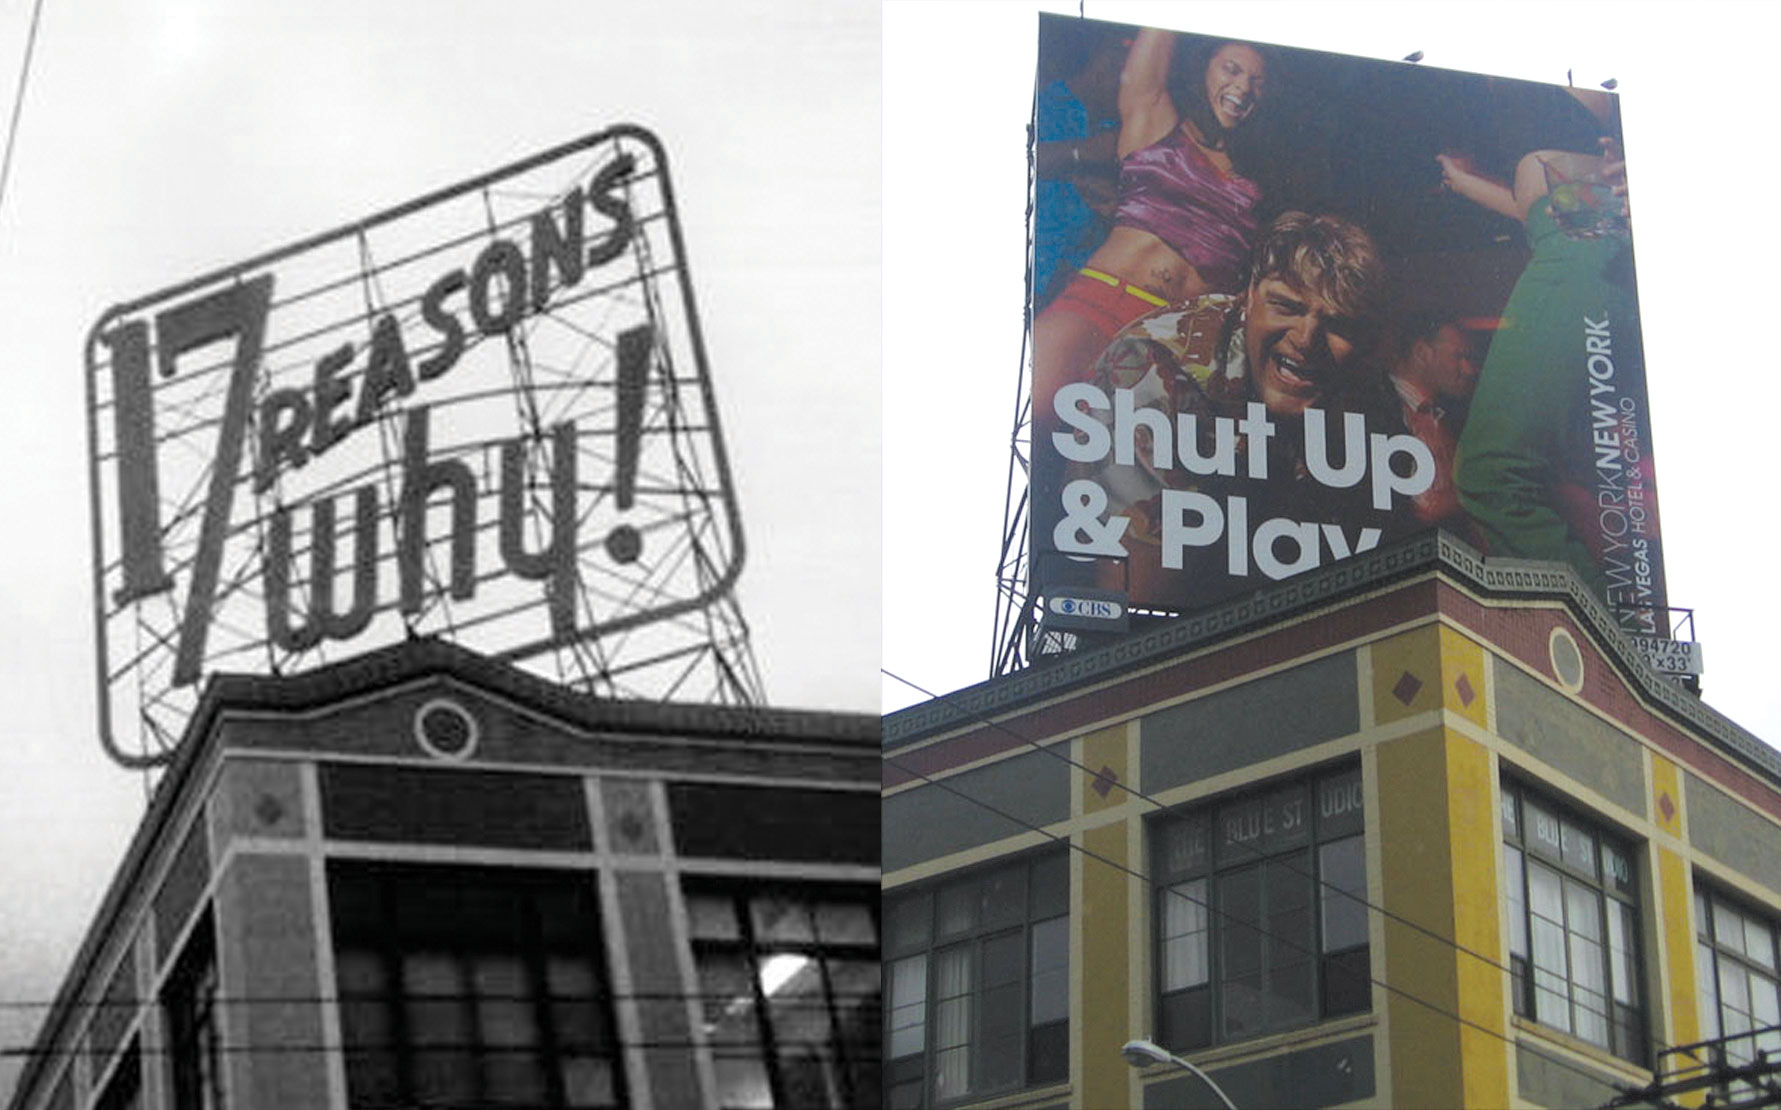 Two images of a building with different rooftop signs: a neon sign with "17 reasons why" and a new billboard with "Shut up and play" with a photo of revelers partying.